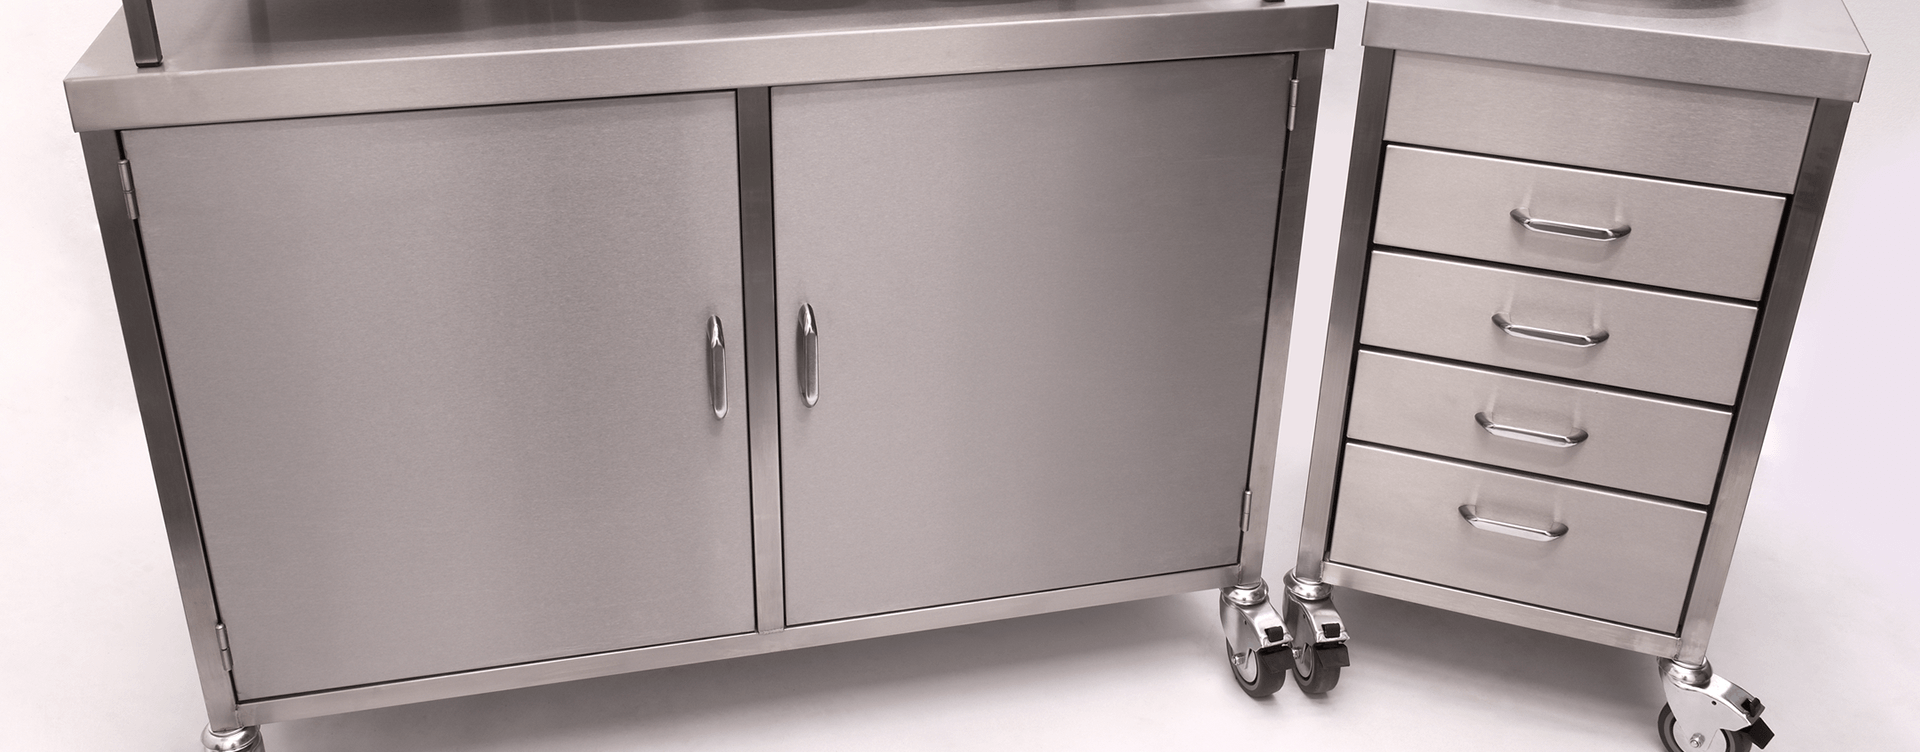 Stainless Steel kitchen cupboards and draws